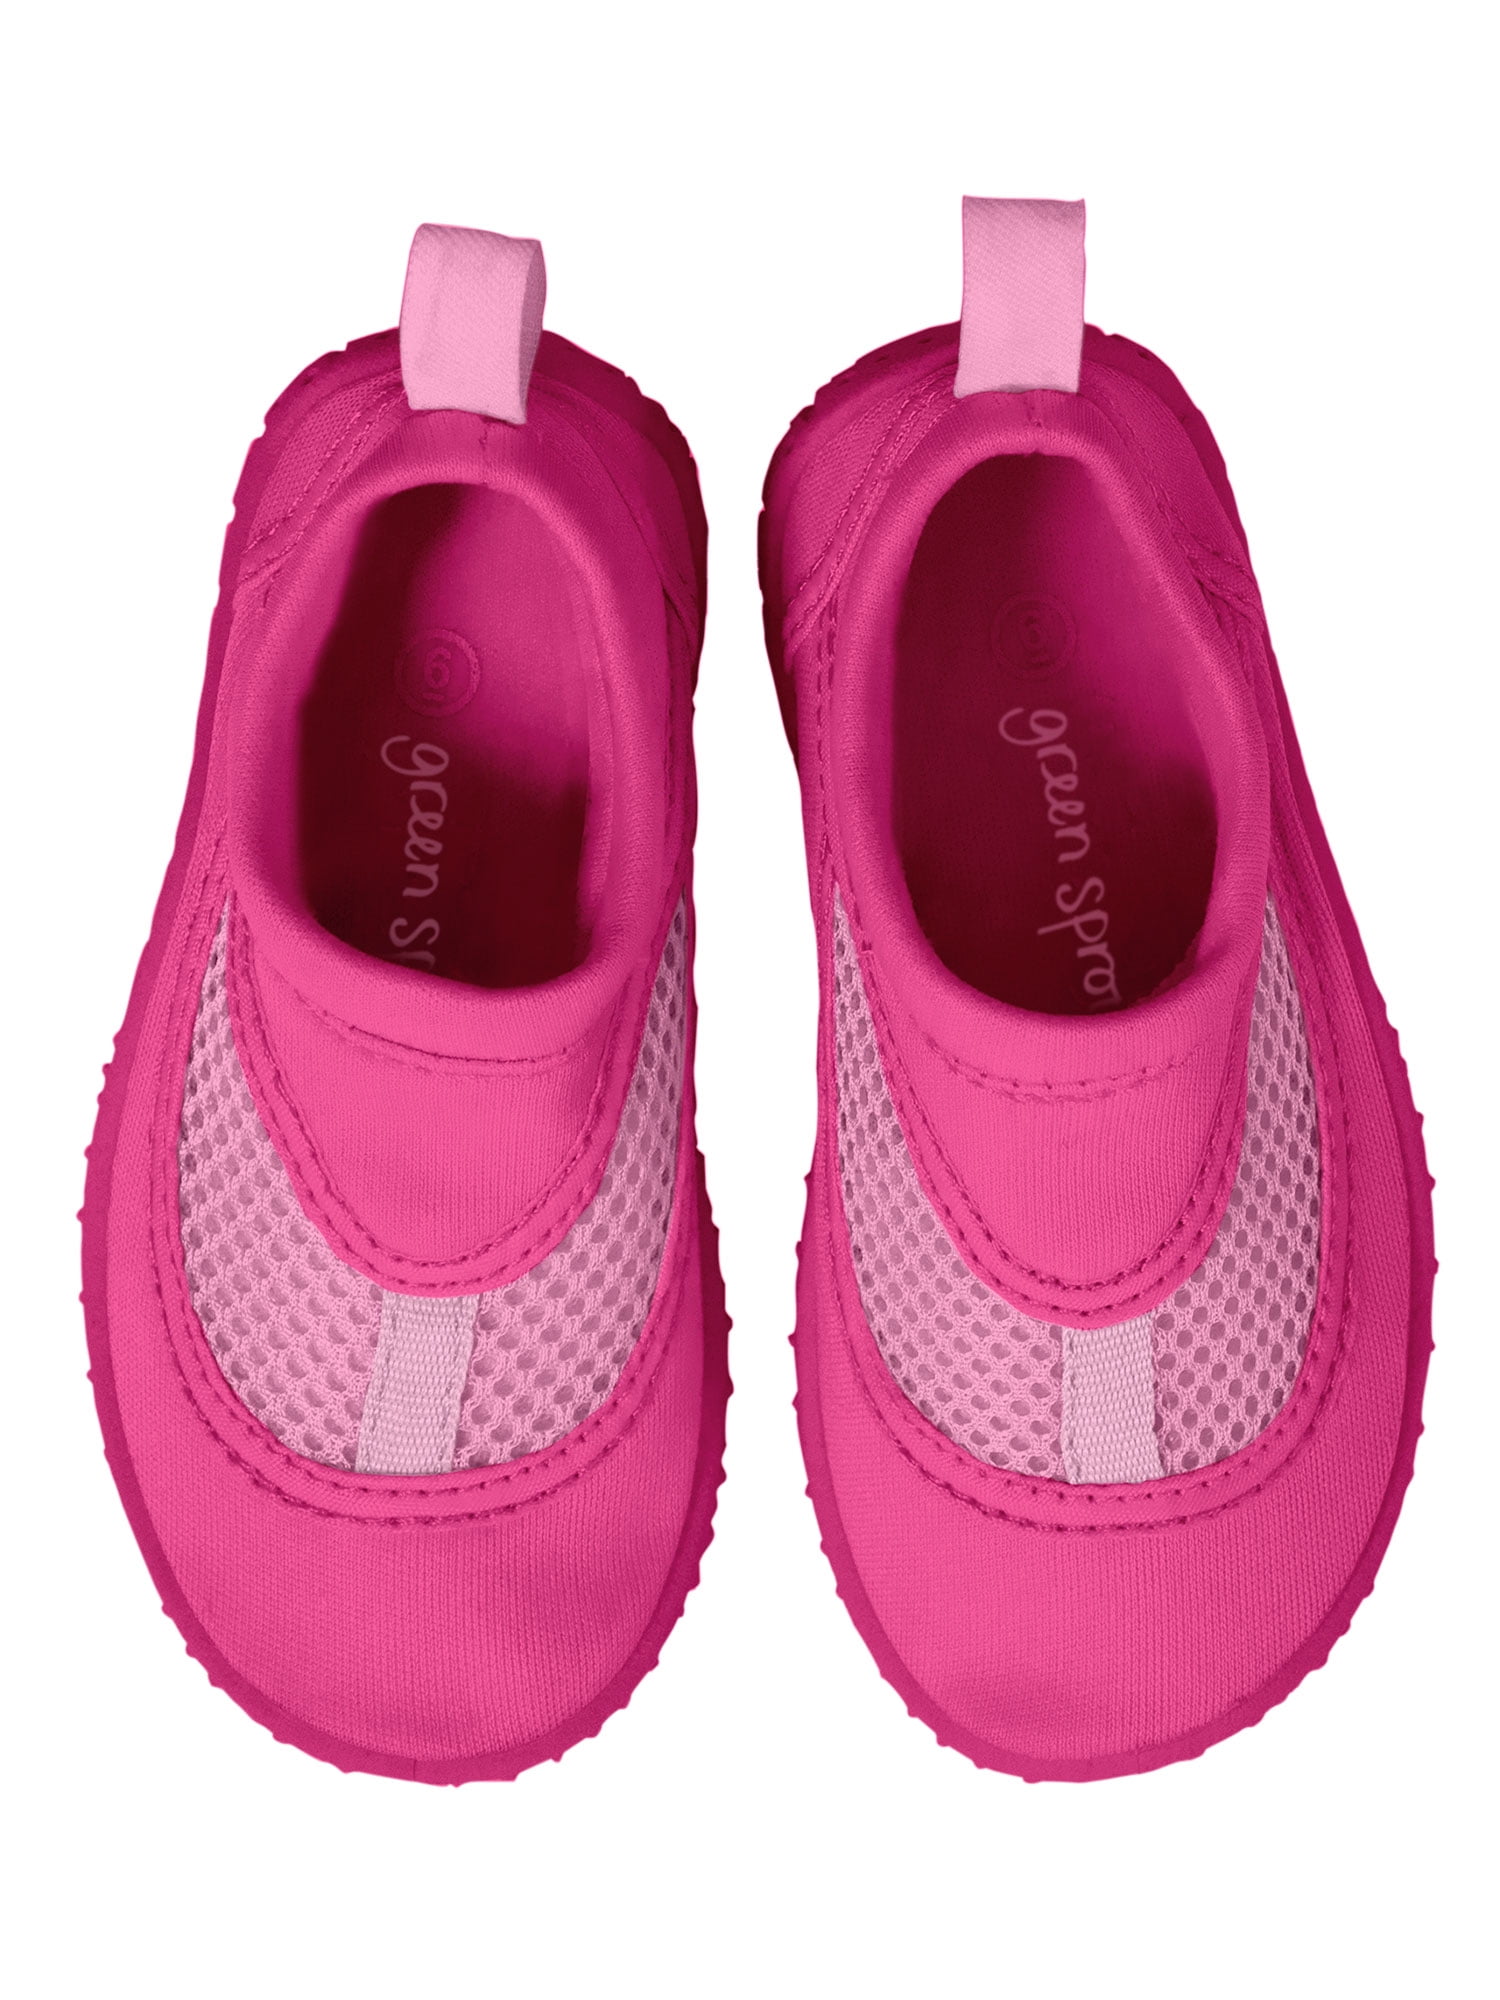 walmart water shoes in store